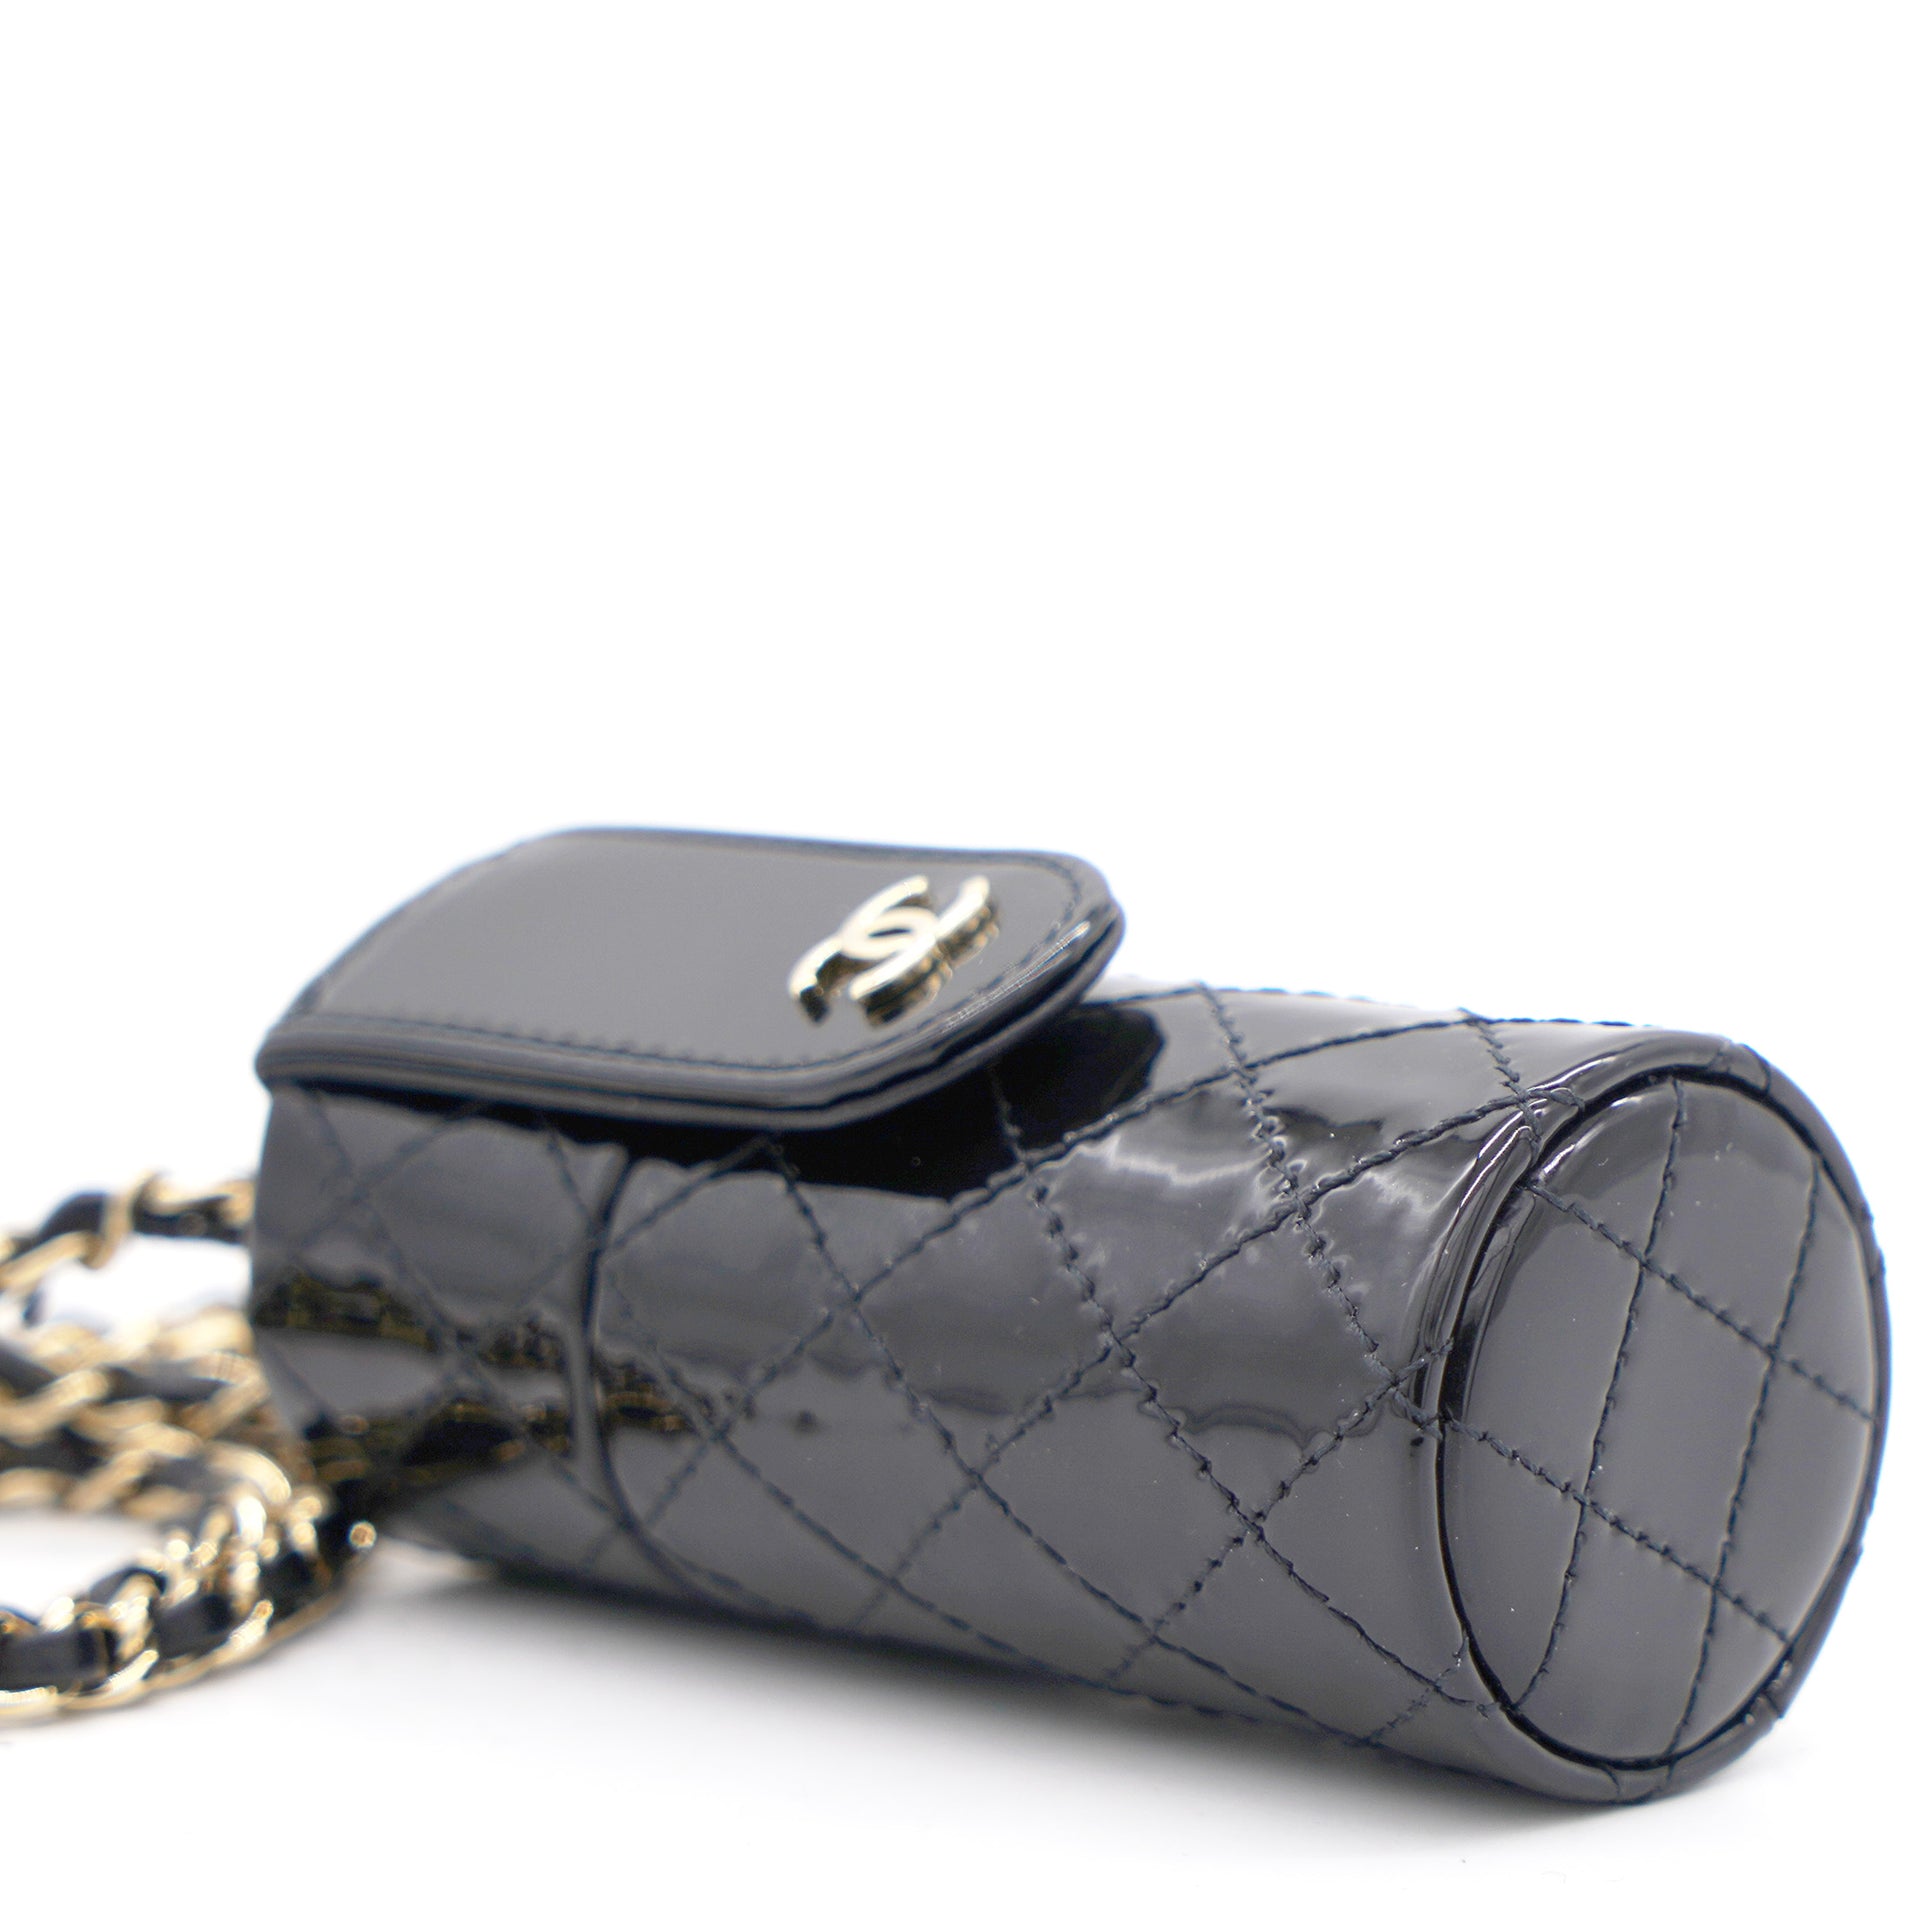 Chanel Black Quilted Patent Leather Lipstick Case On Chain